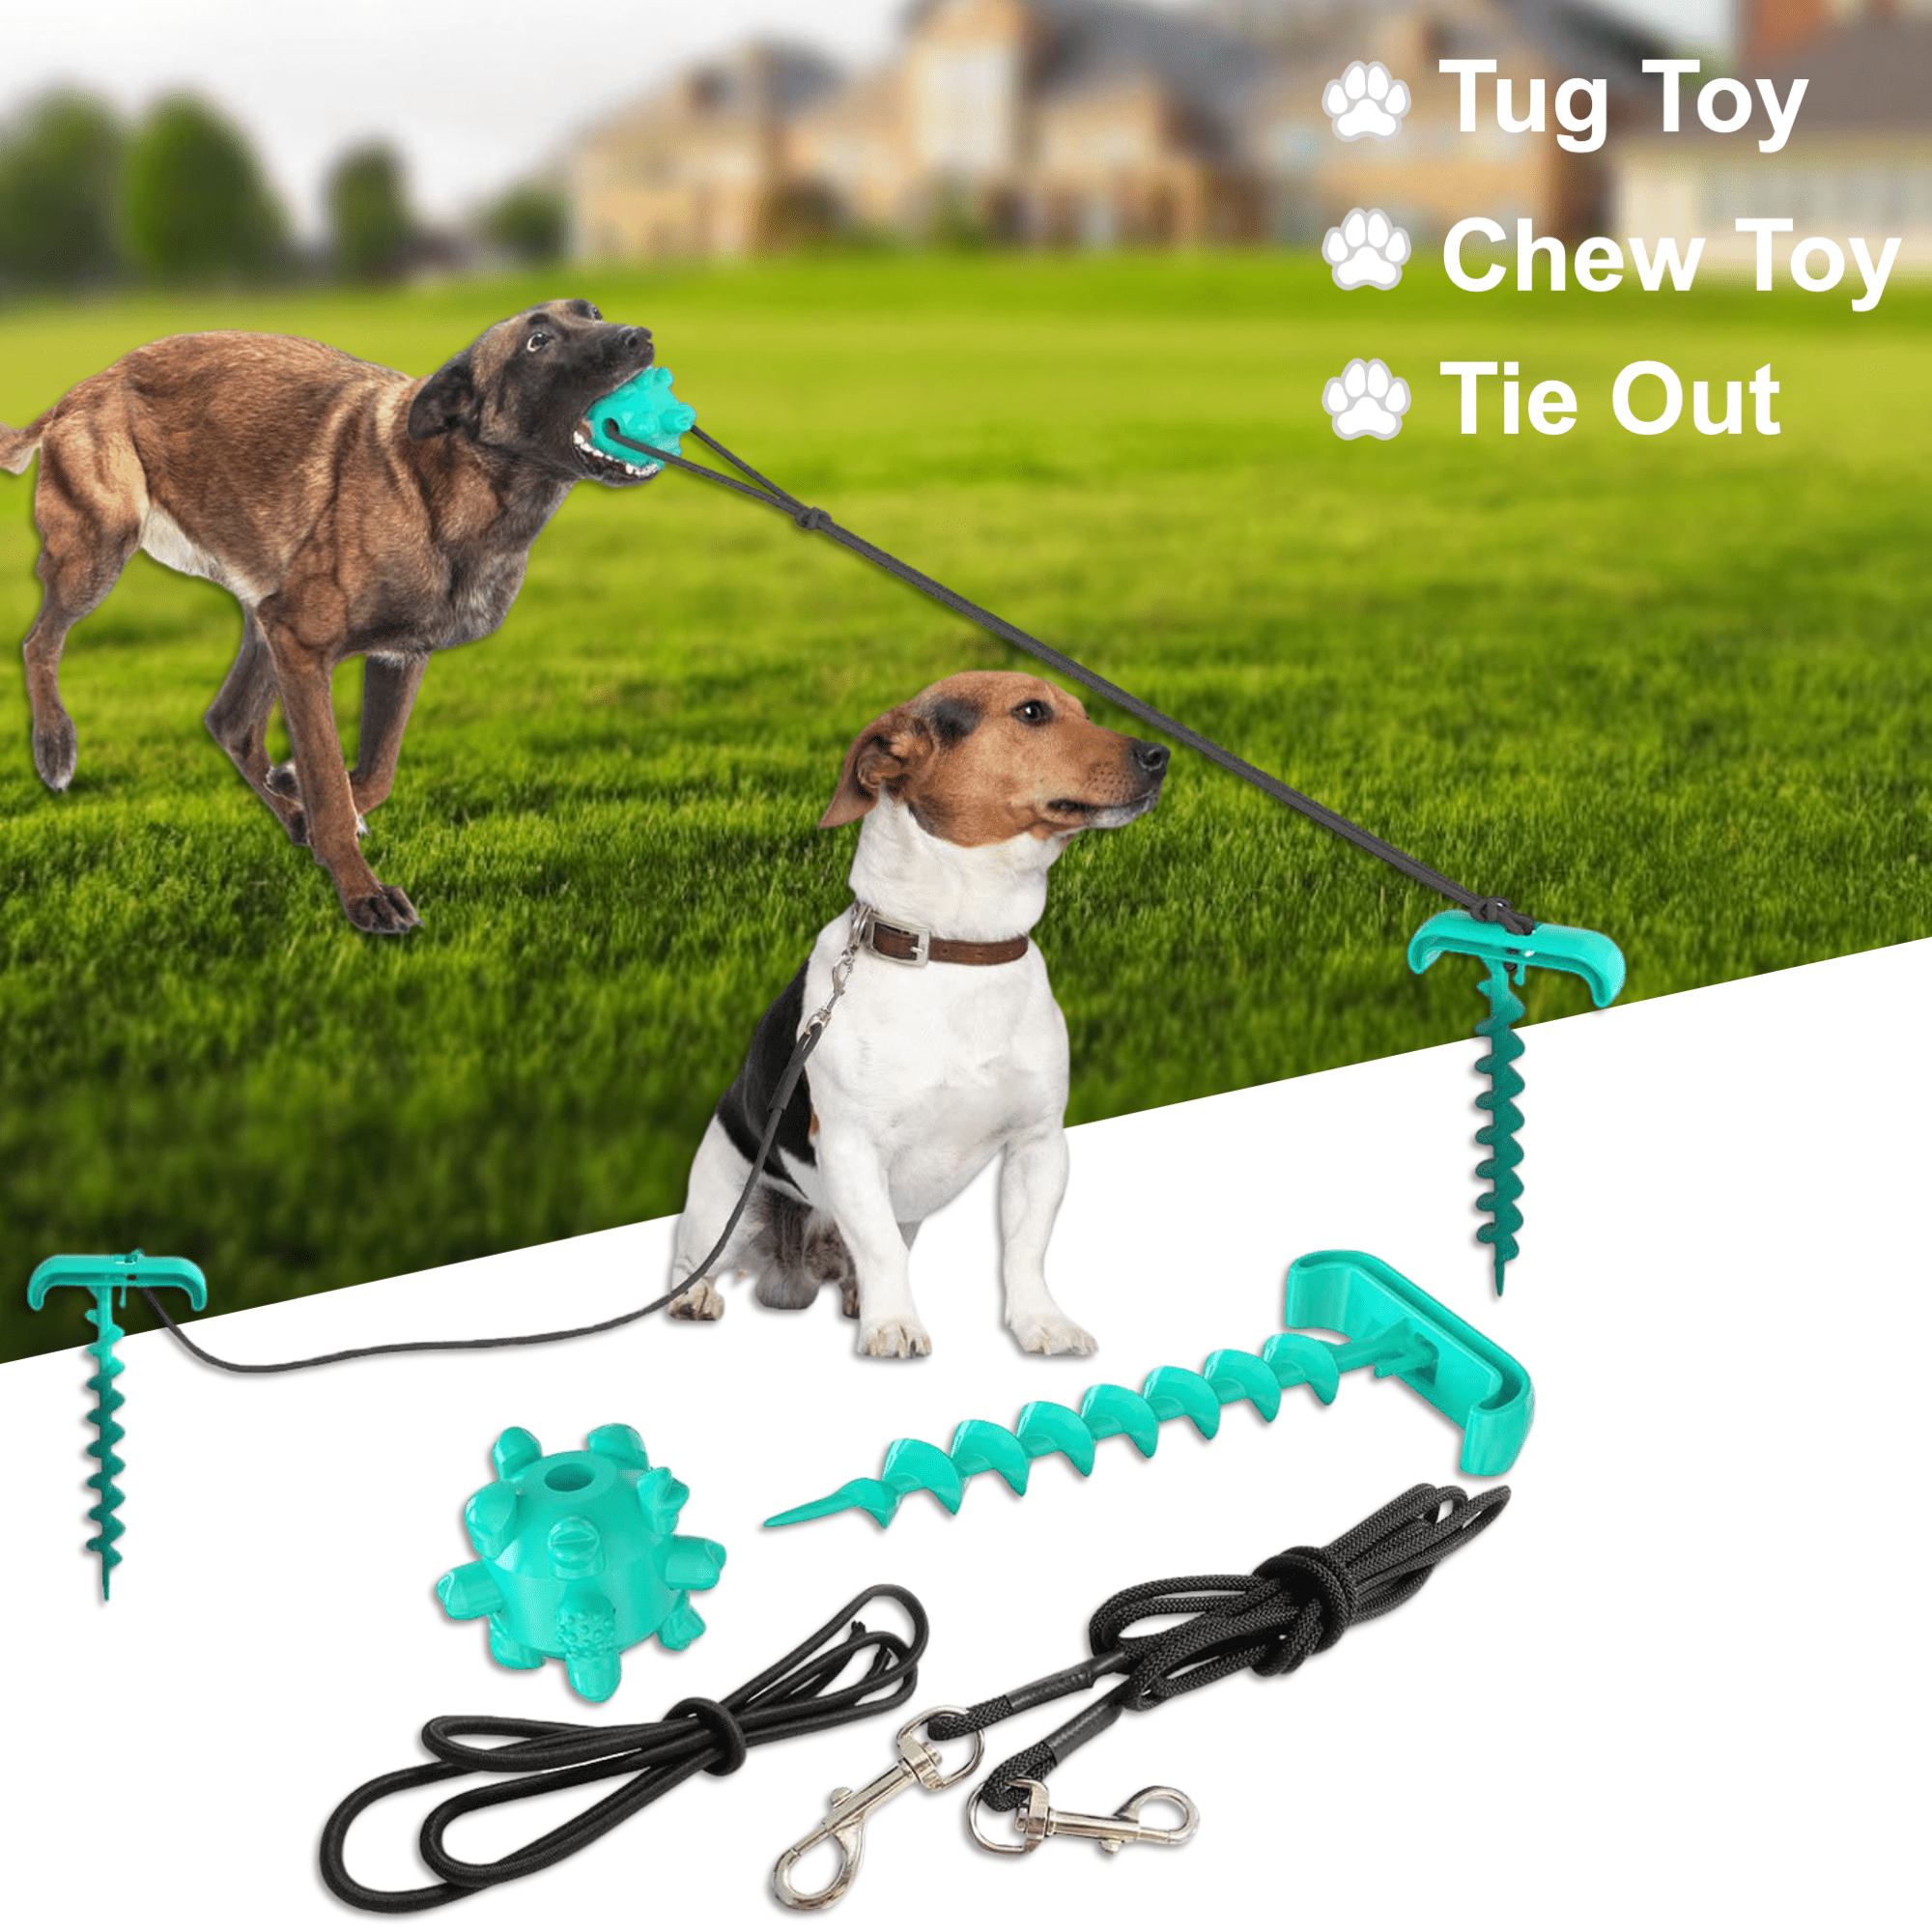 Durable dog toy Basic tug toy with bungee handle and soft ball Colorful toy for dogs Valentine's gift for dogs